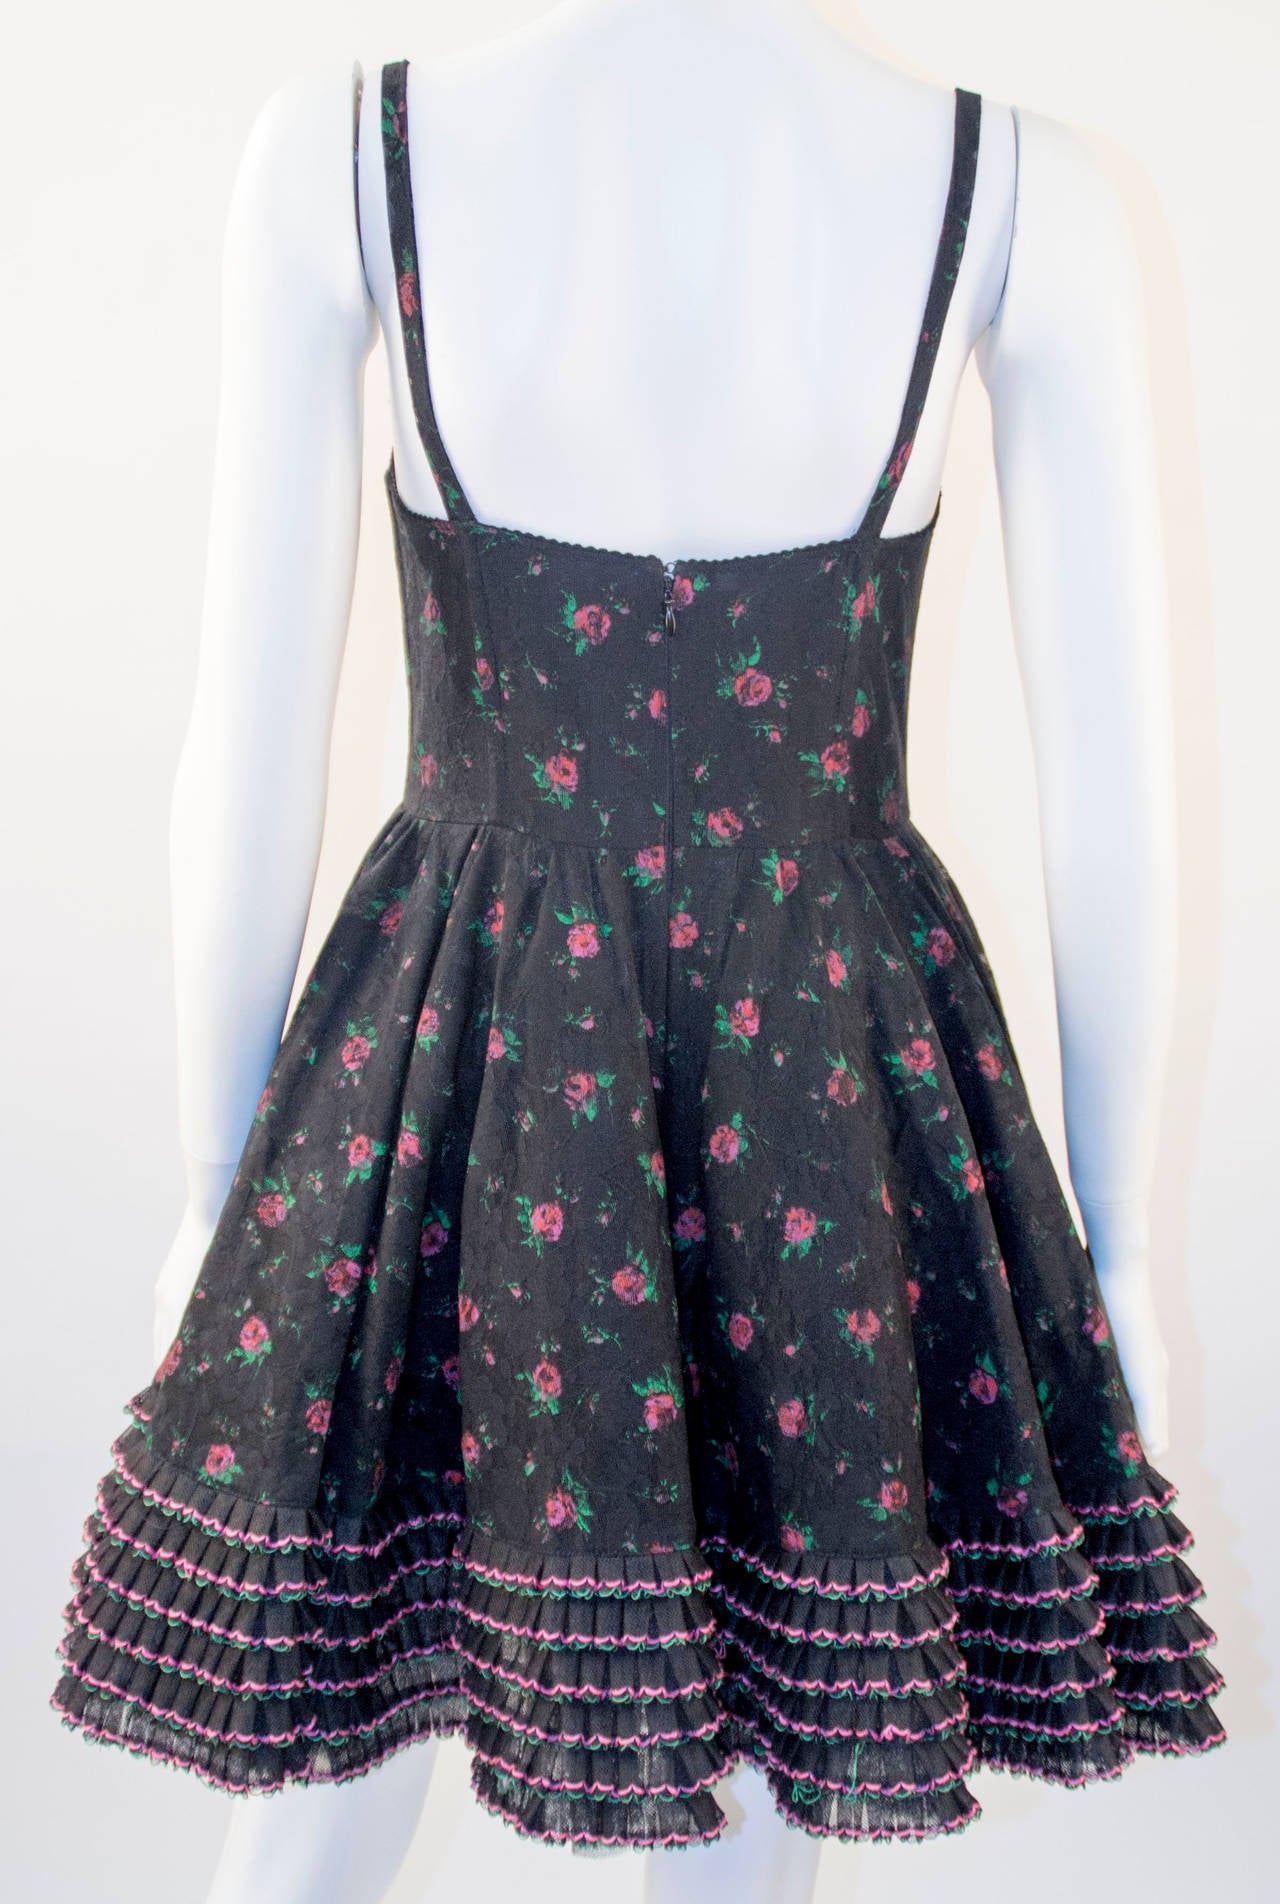 Women's 1980s Yvan and Marzia Black Floral Lace Dress